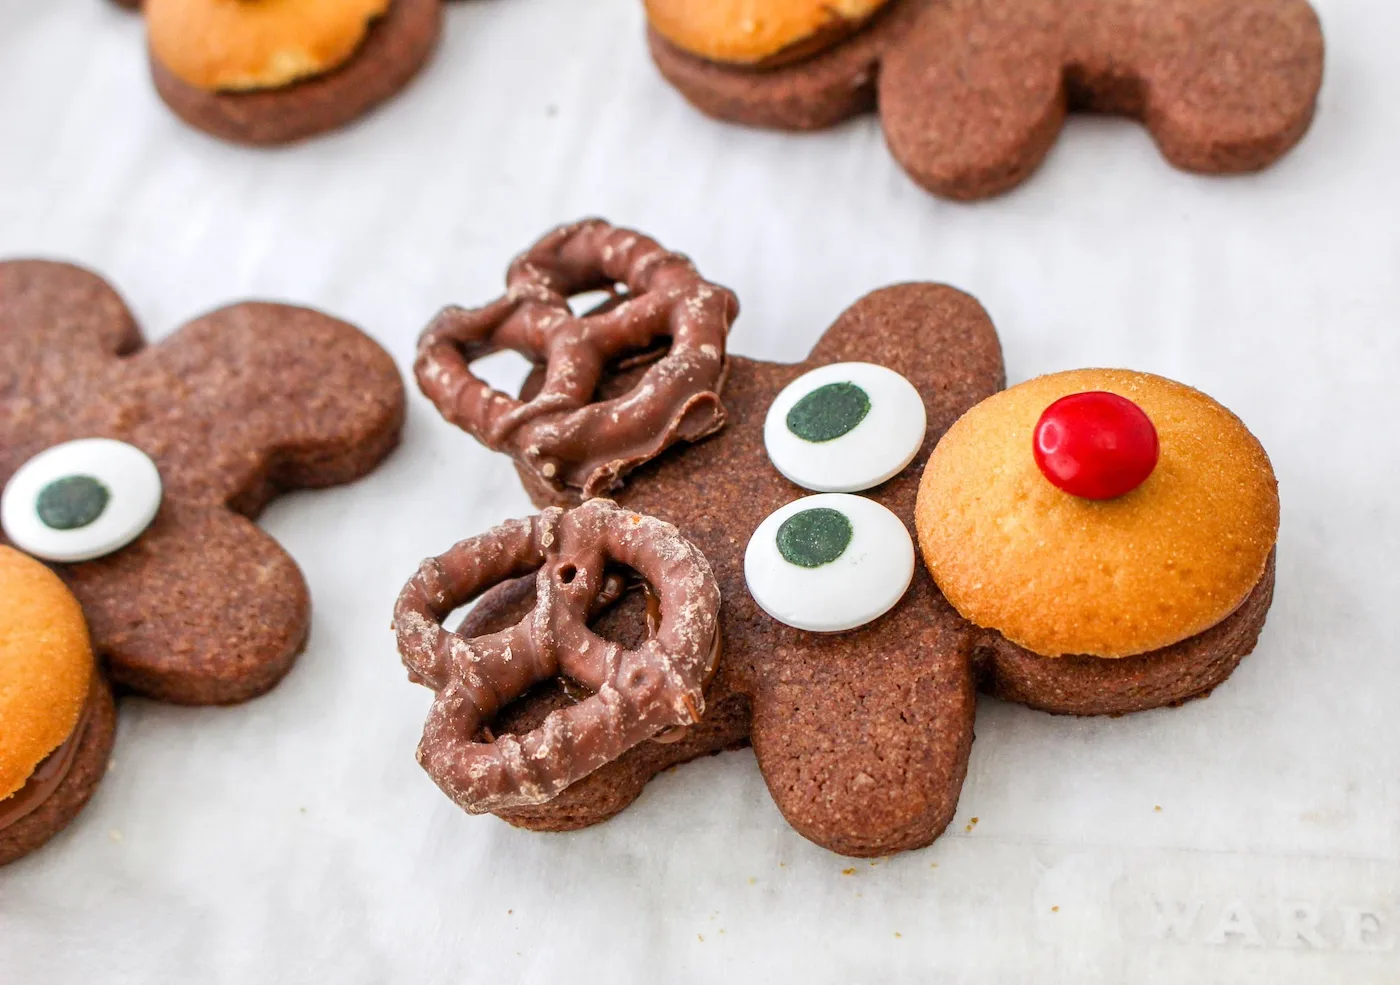 Eyes and pretzel antlers attached with chocolate